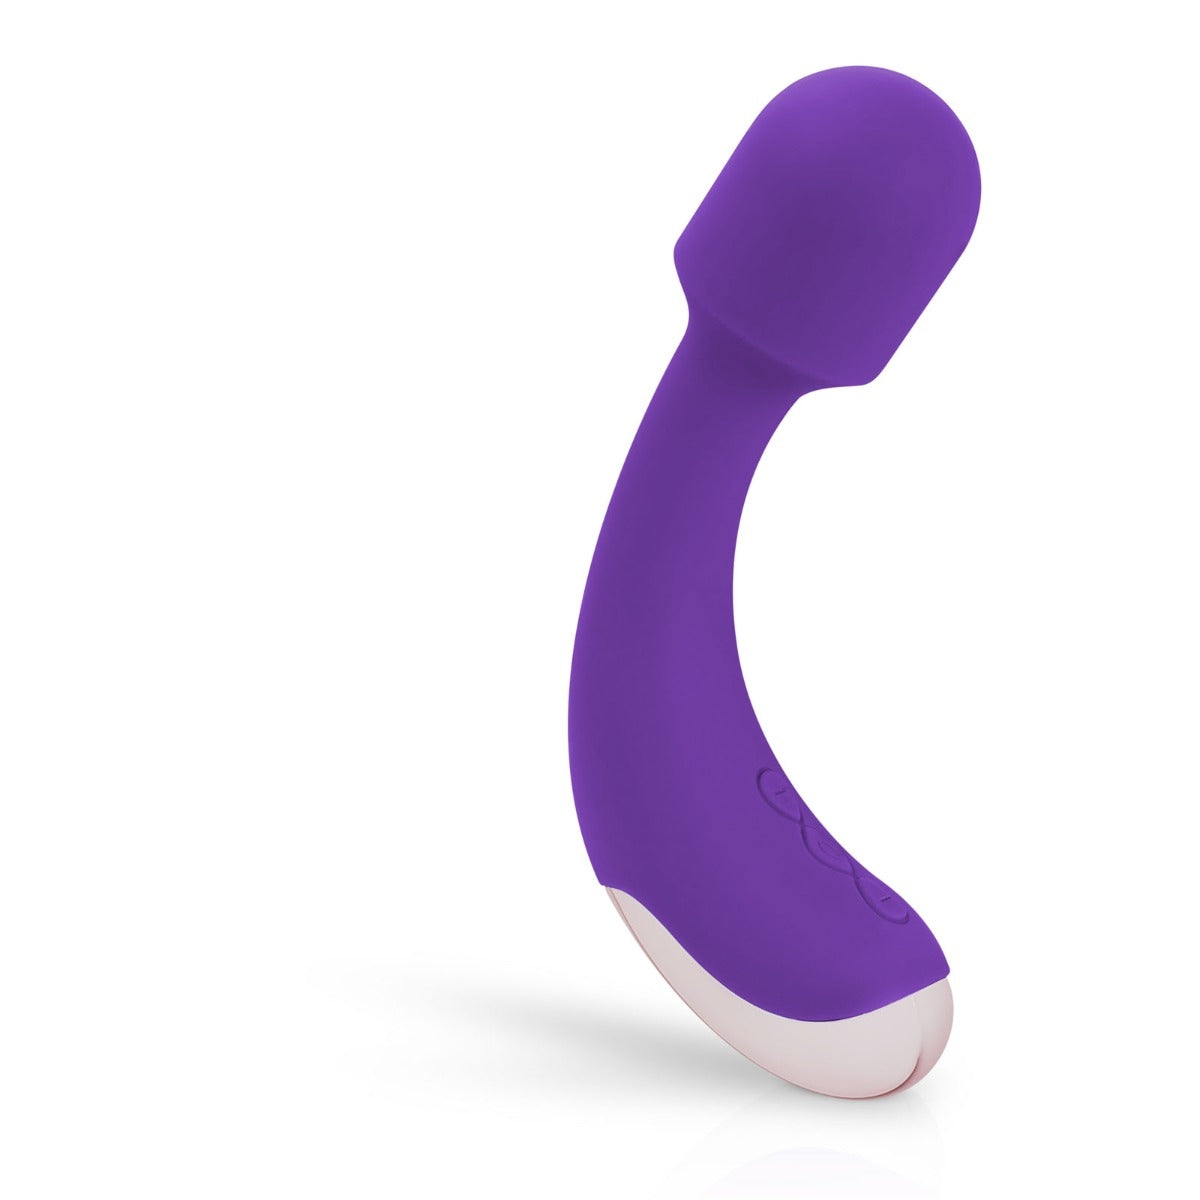 Loveboxxx Enjoy Yourself Deluxe Sex Toy Set For Her